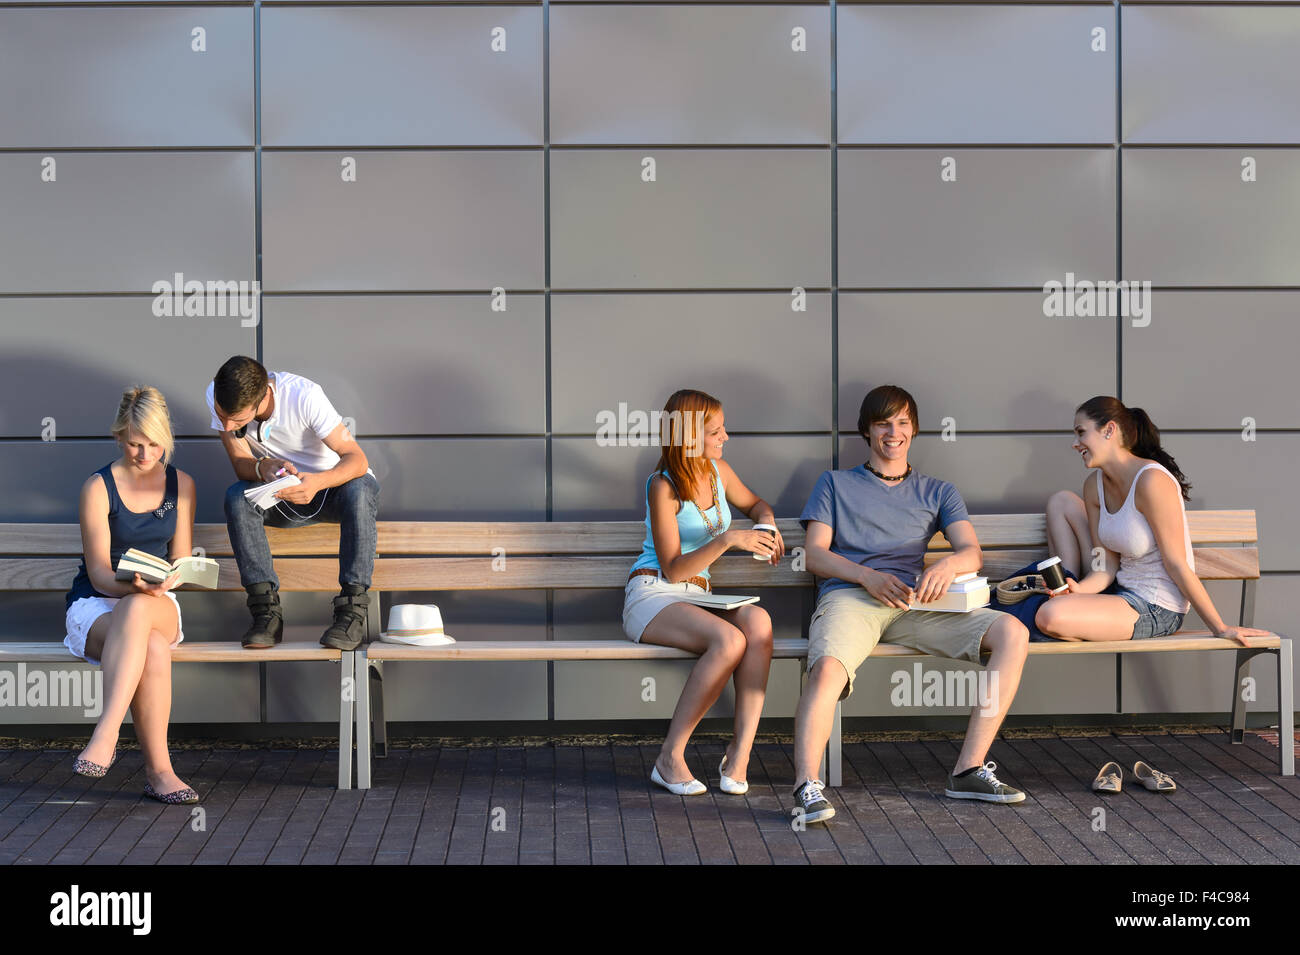 College students sitting on bench modern wall Stock Photo